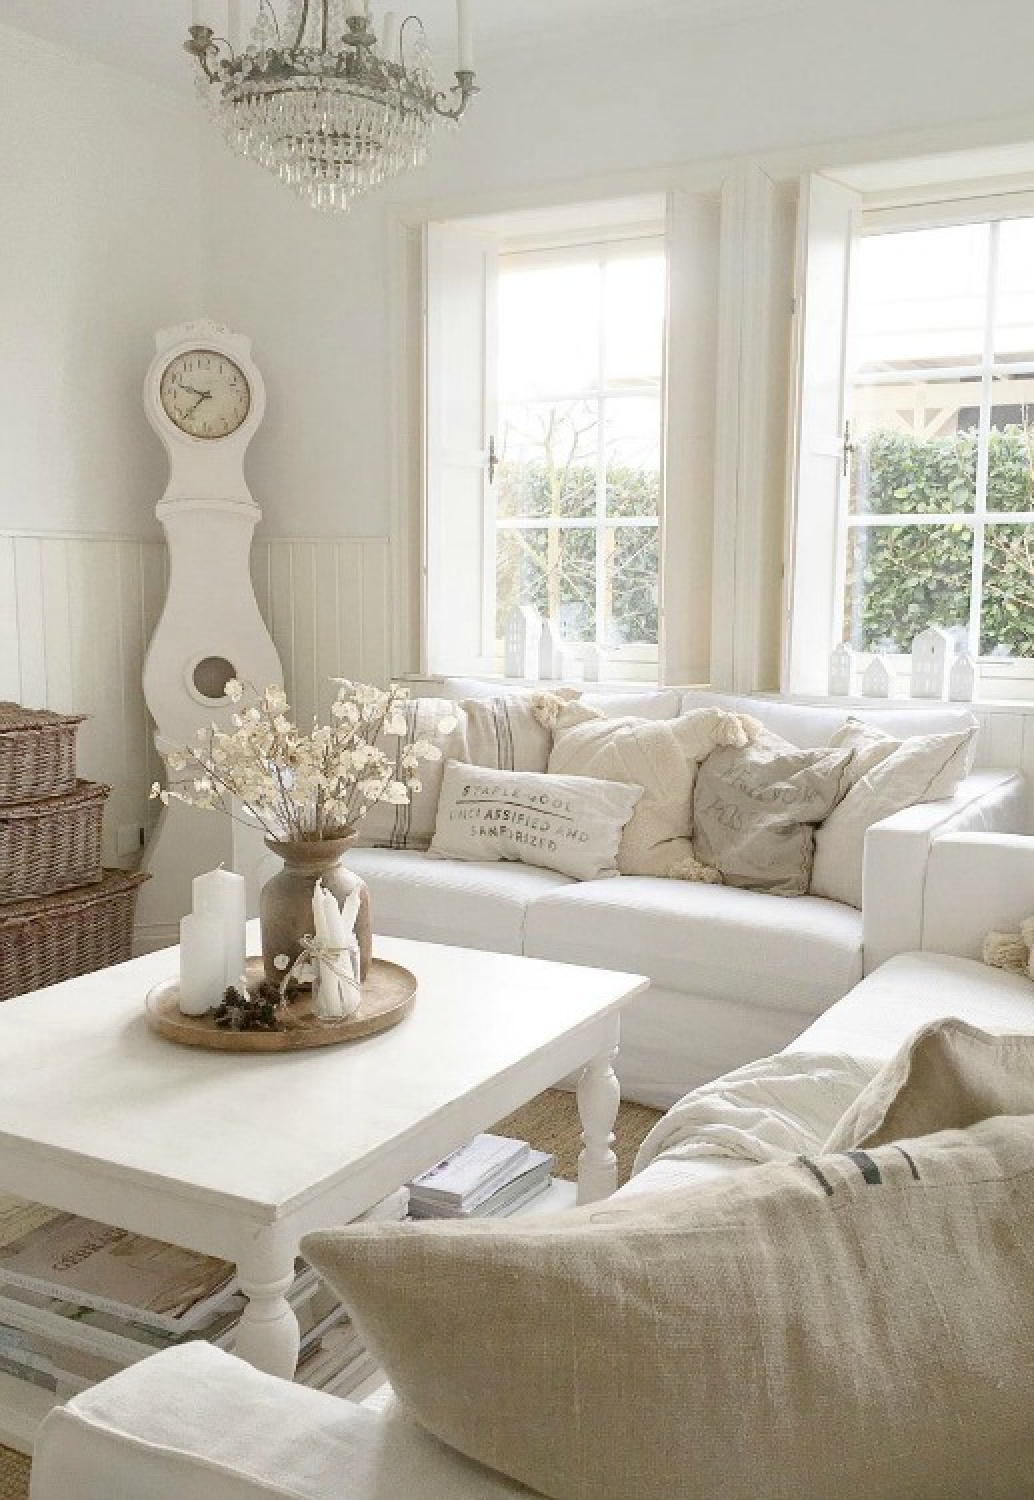 White on white French Nordic style living room with Mora clock and pale accessories - Villa Jenal.